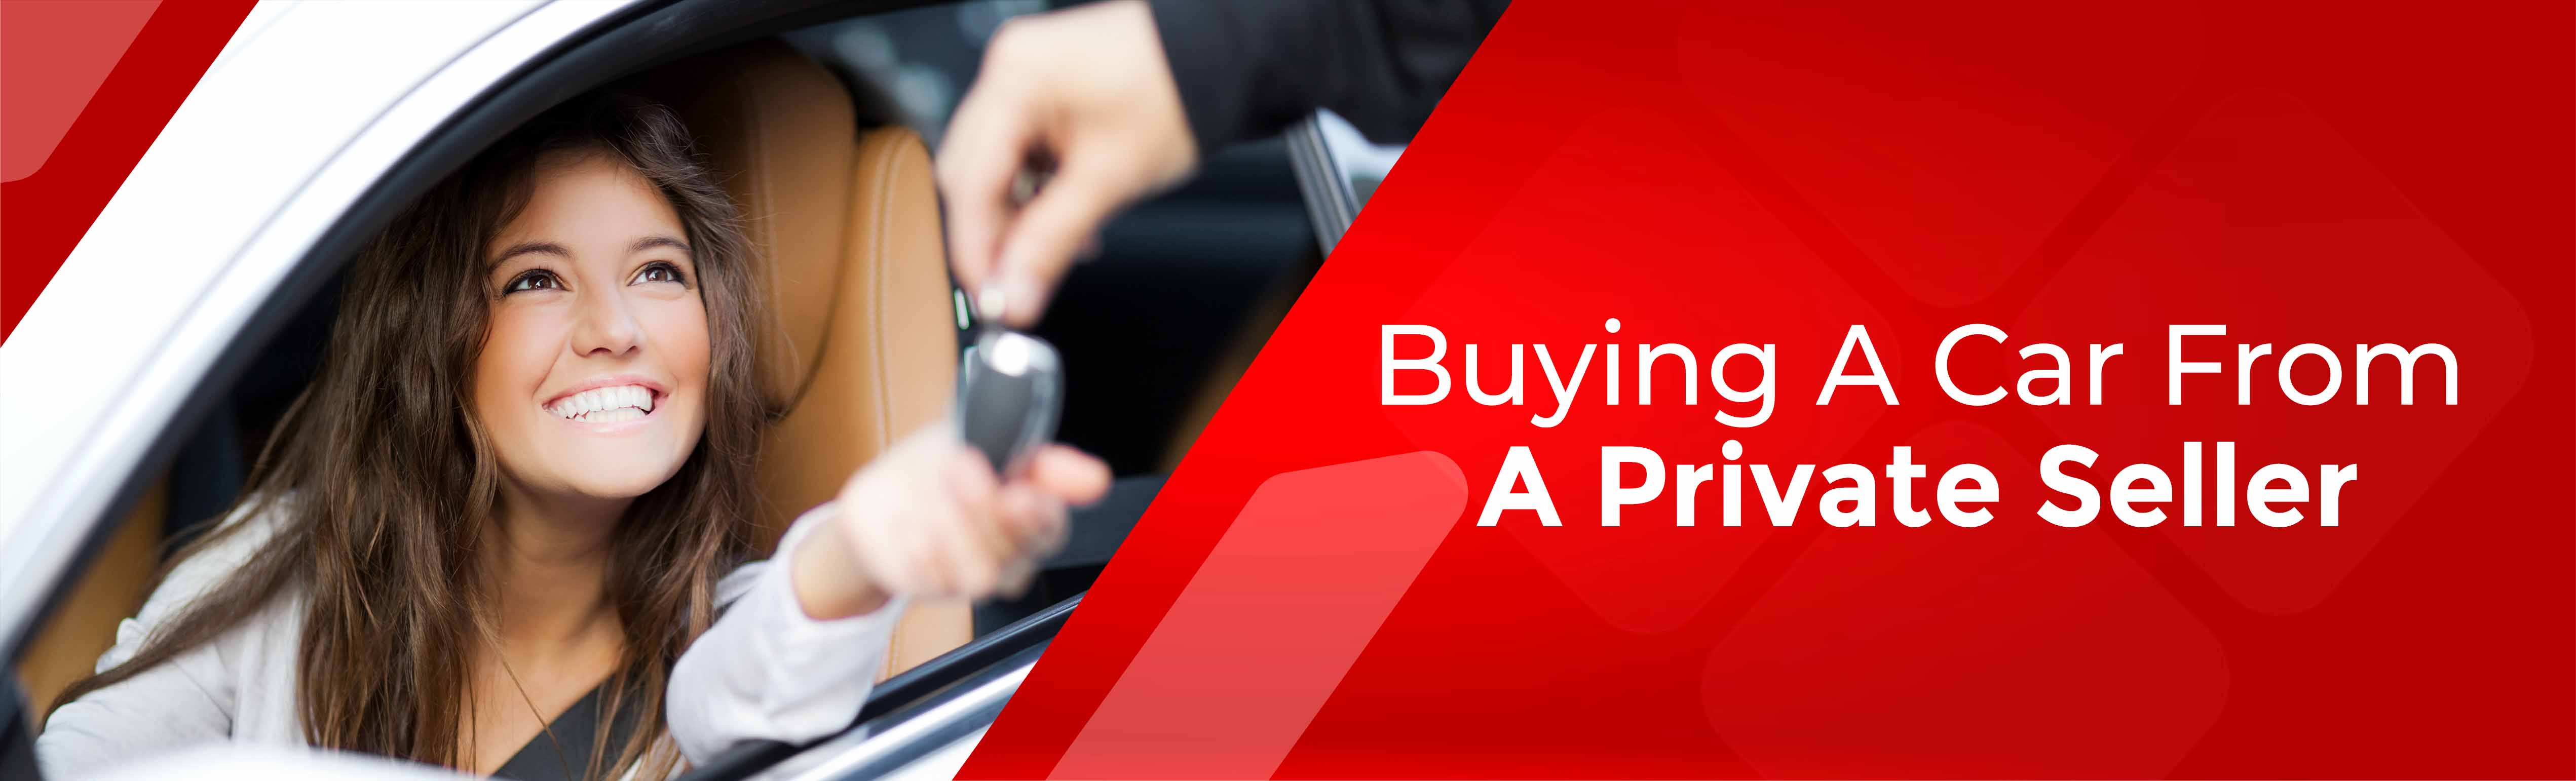 Buying A Car From A Private Seller